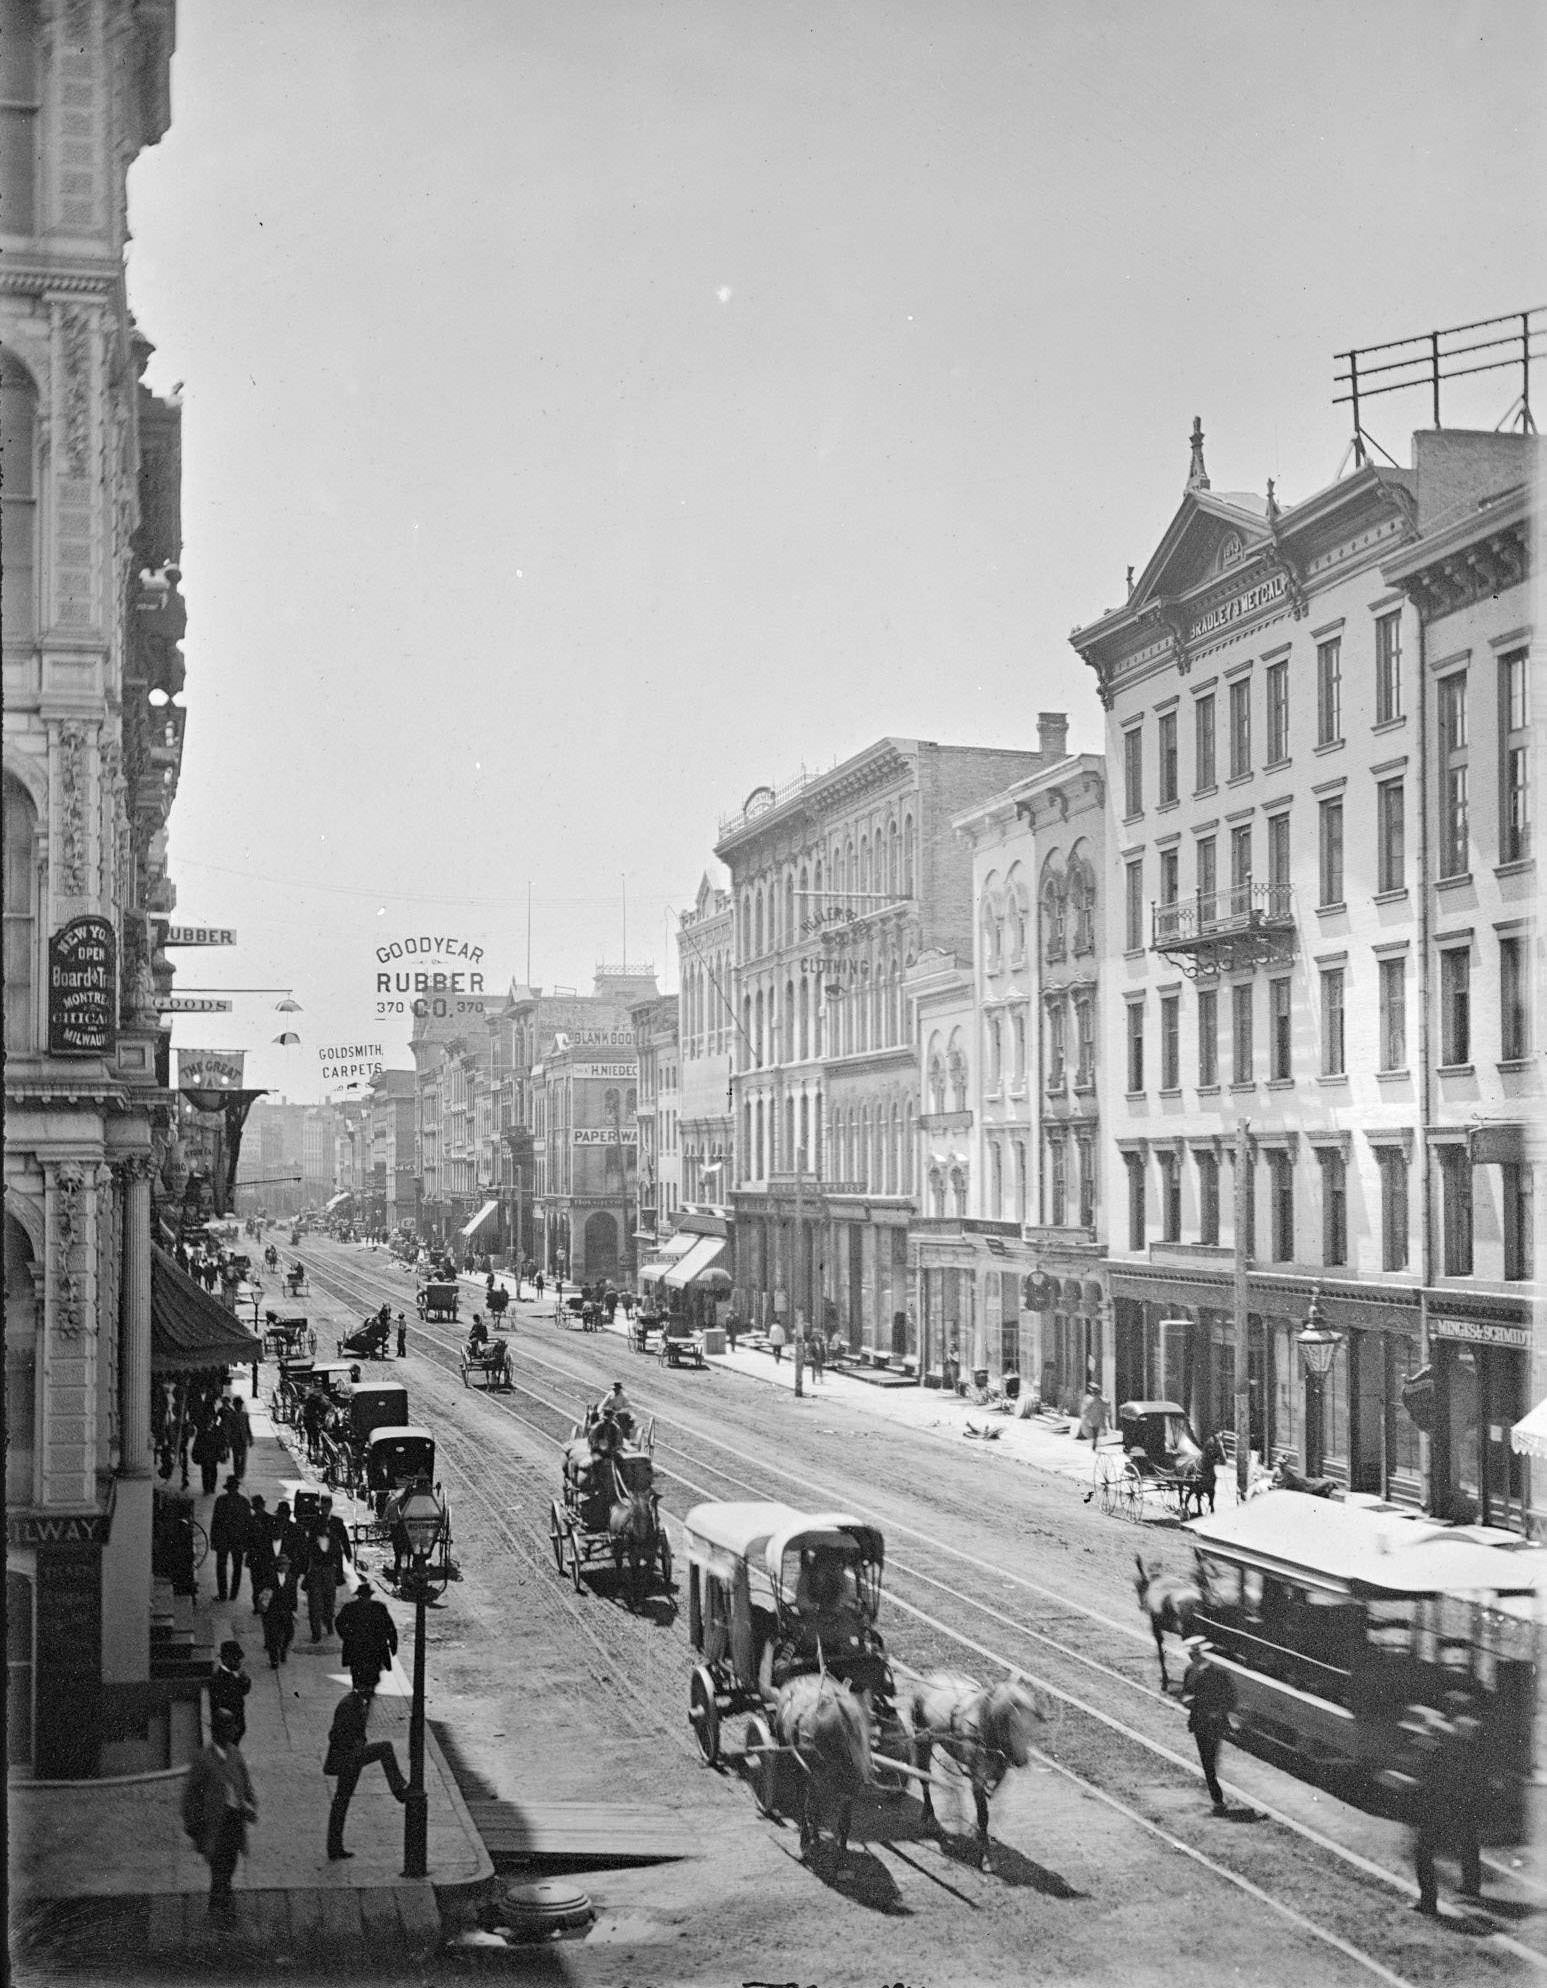 Elevated view down East Water Street from Wisconsin Avenue, with buildings, people, and street traffic including horse-drawn vehicles and a horse-drawn streetcar, Milwaukee, Wisconsin, 1885.